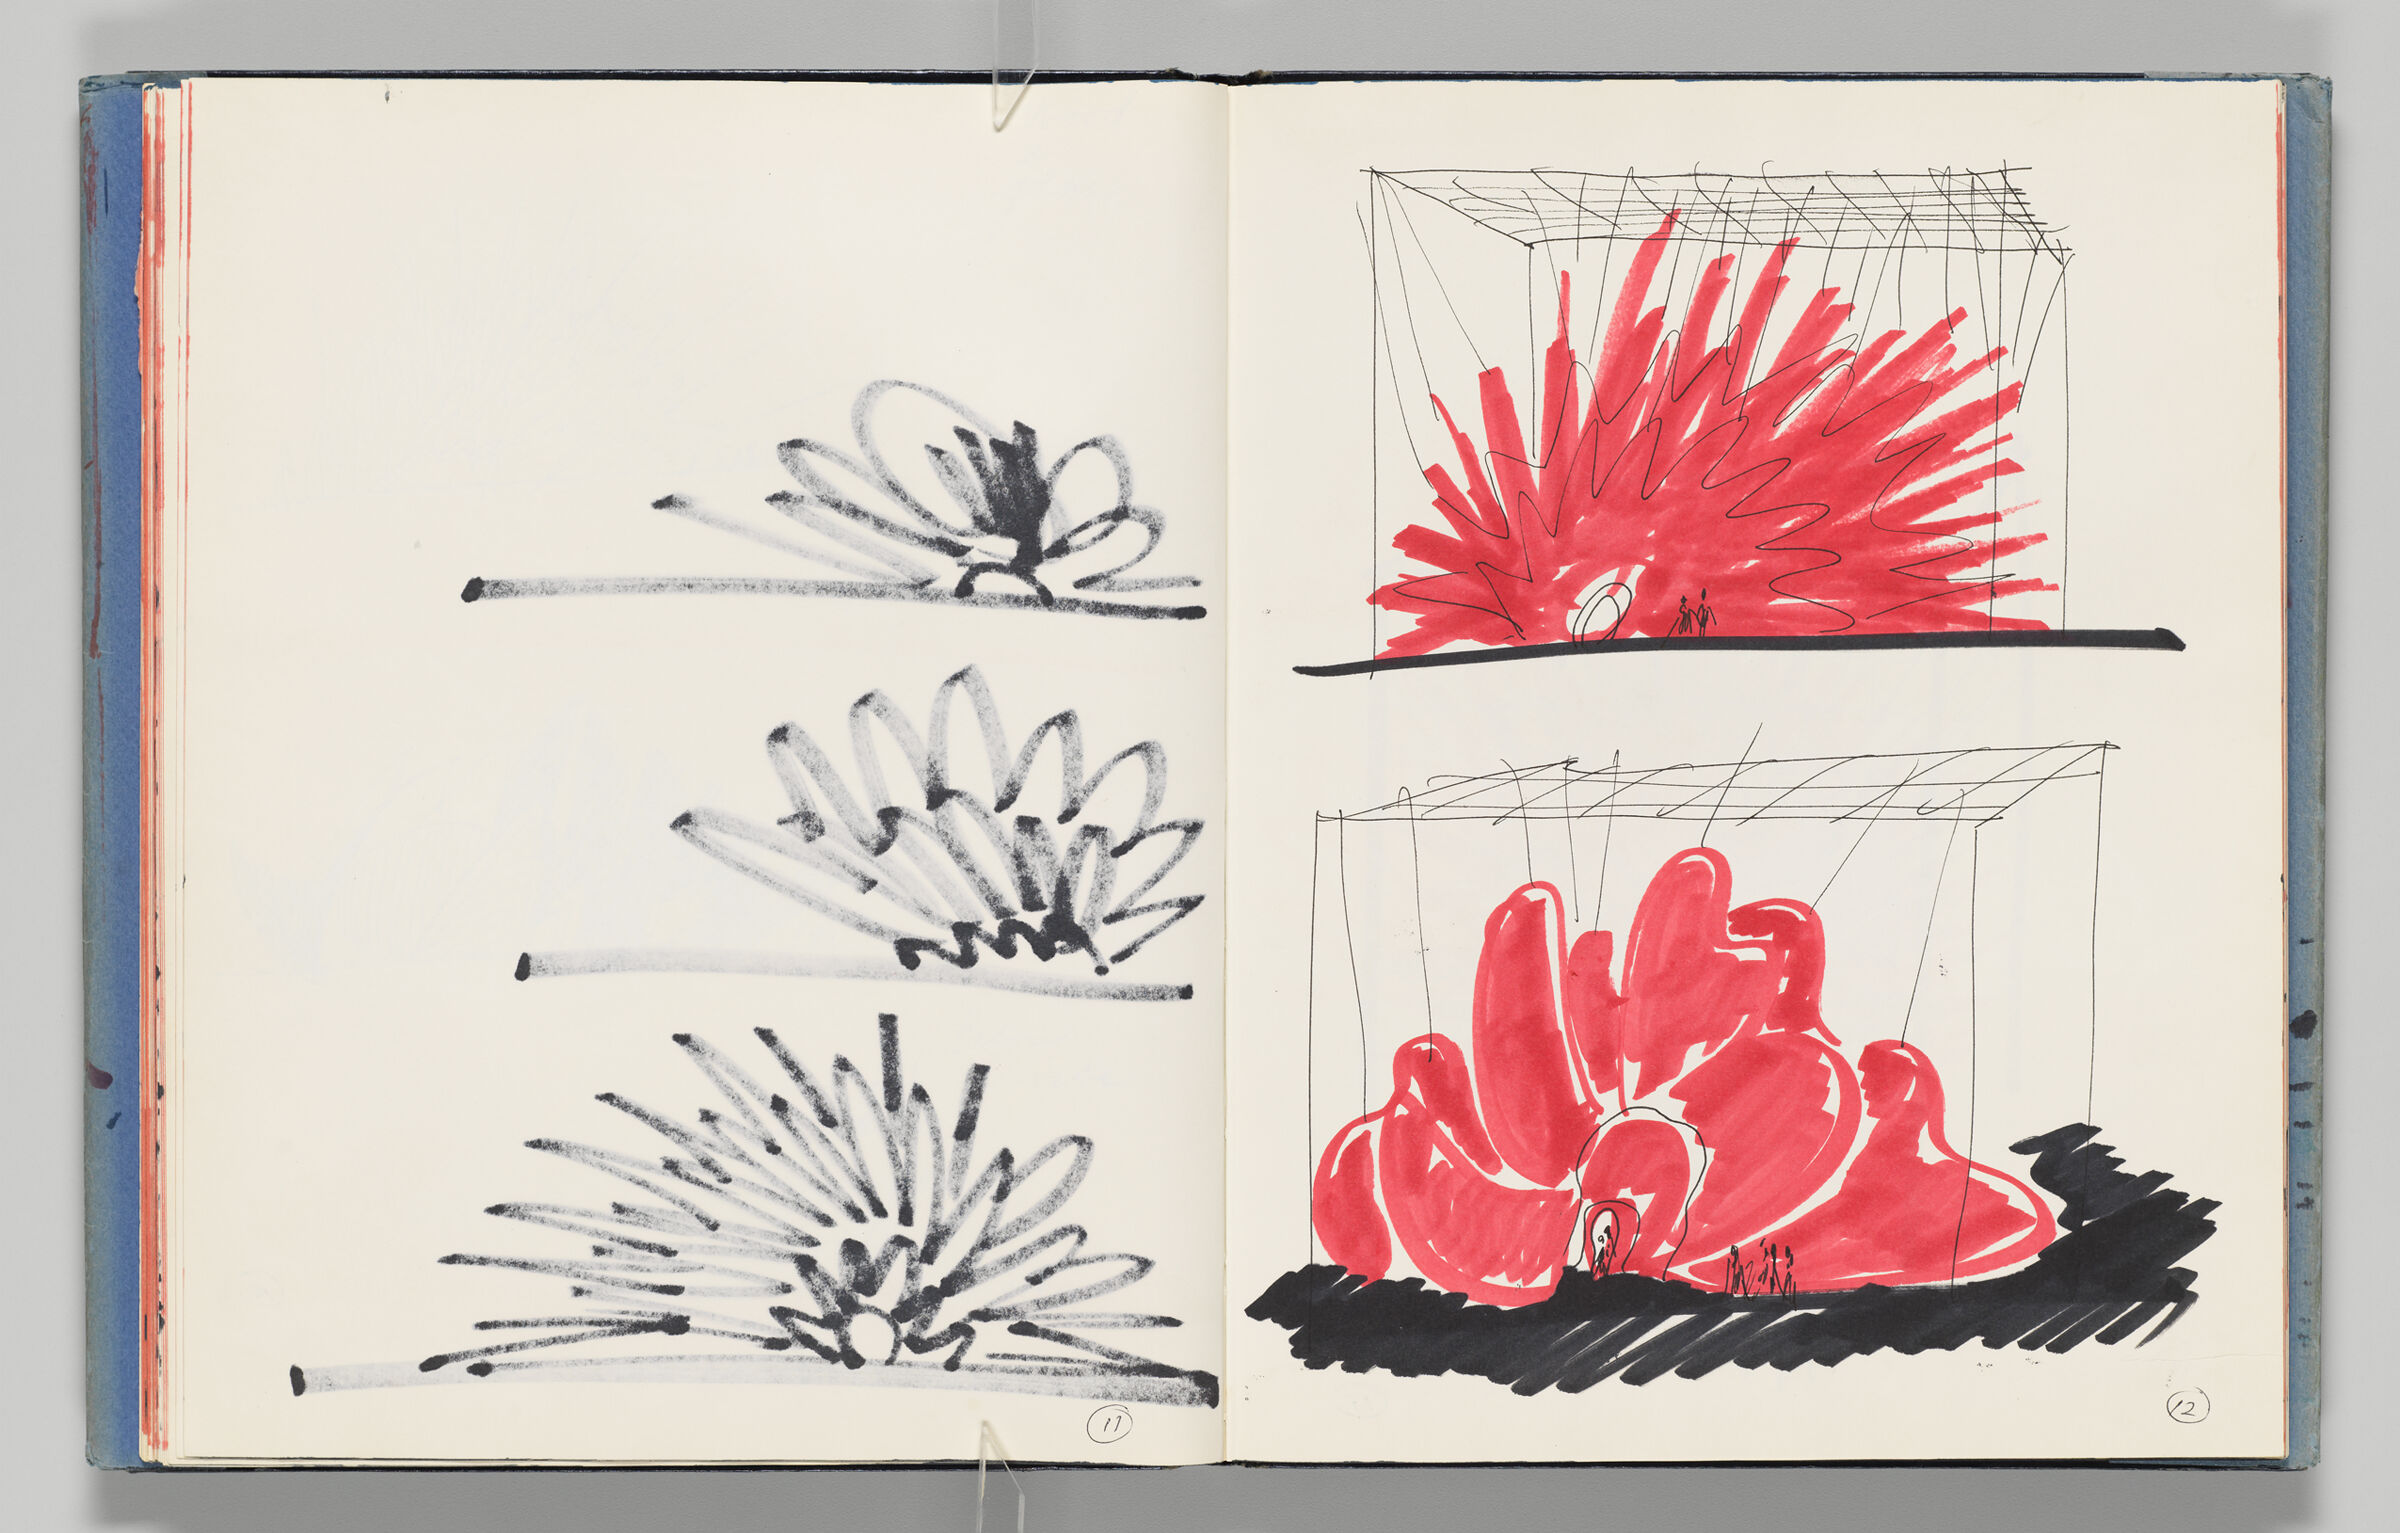 Untitled (Bleed-Through Of Previous Page With Page Number, Left Page); Untitled (Designs For Flower Houses, Right Page)